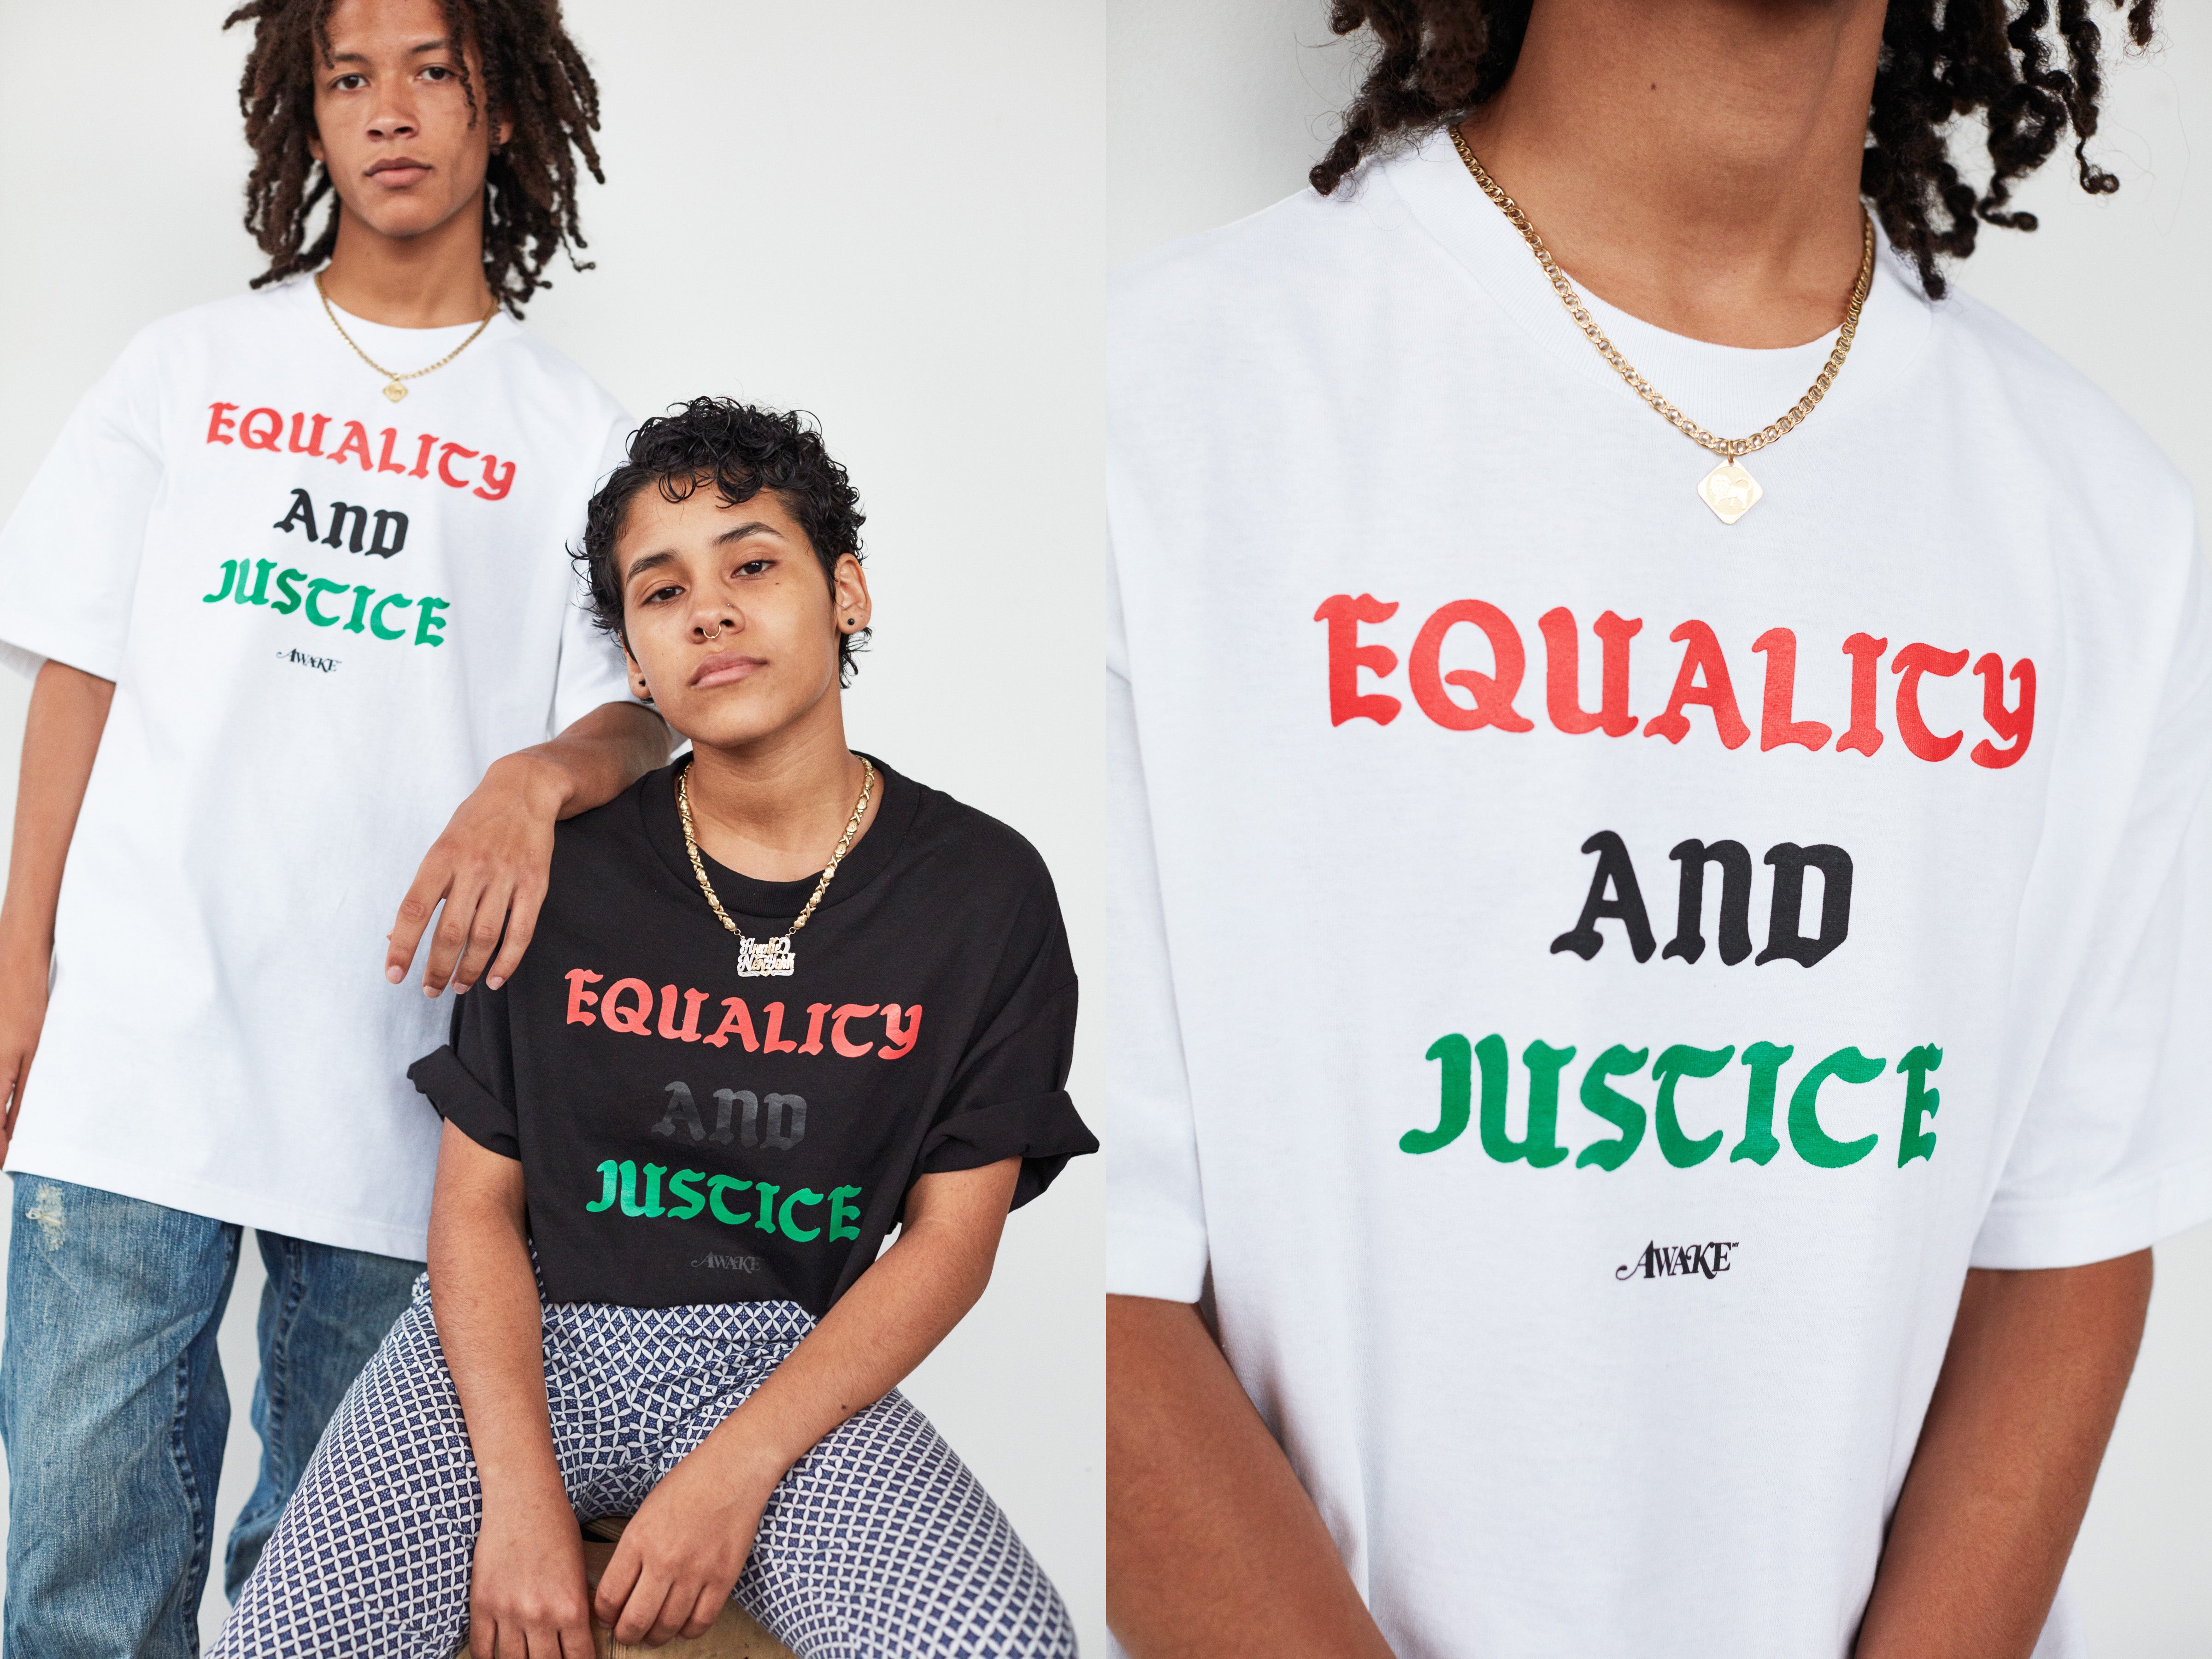 files/4Equality_and_justice_white_black.jpg